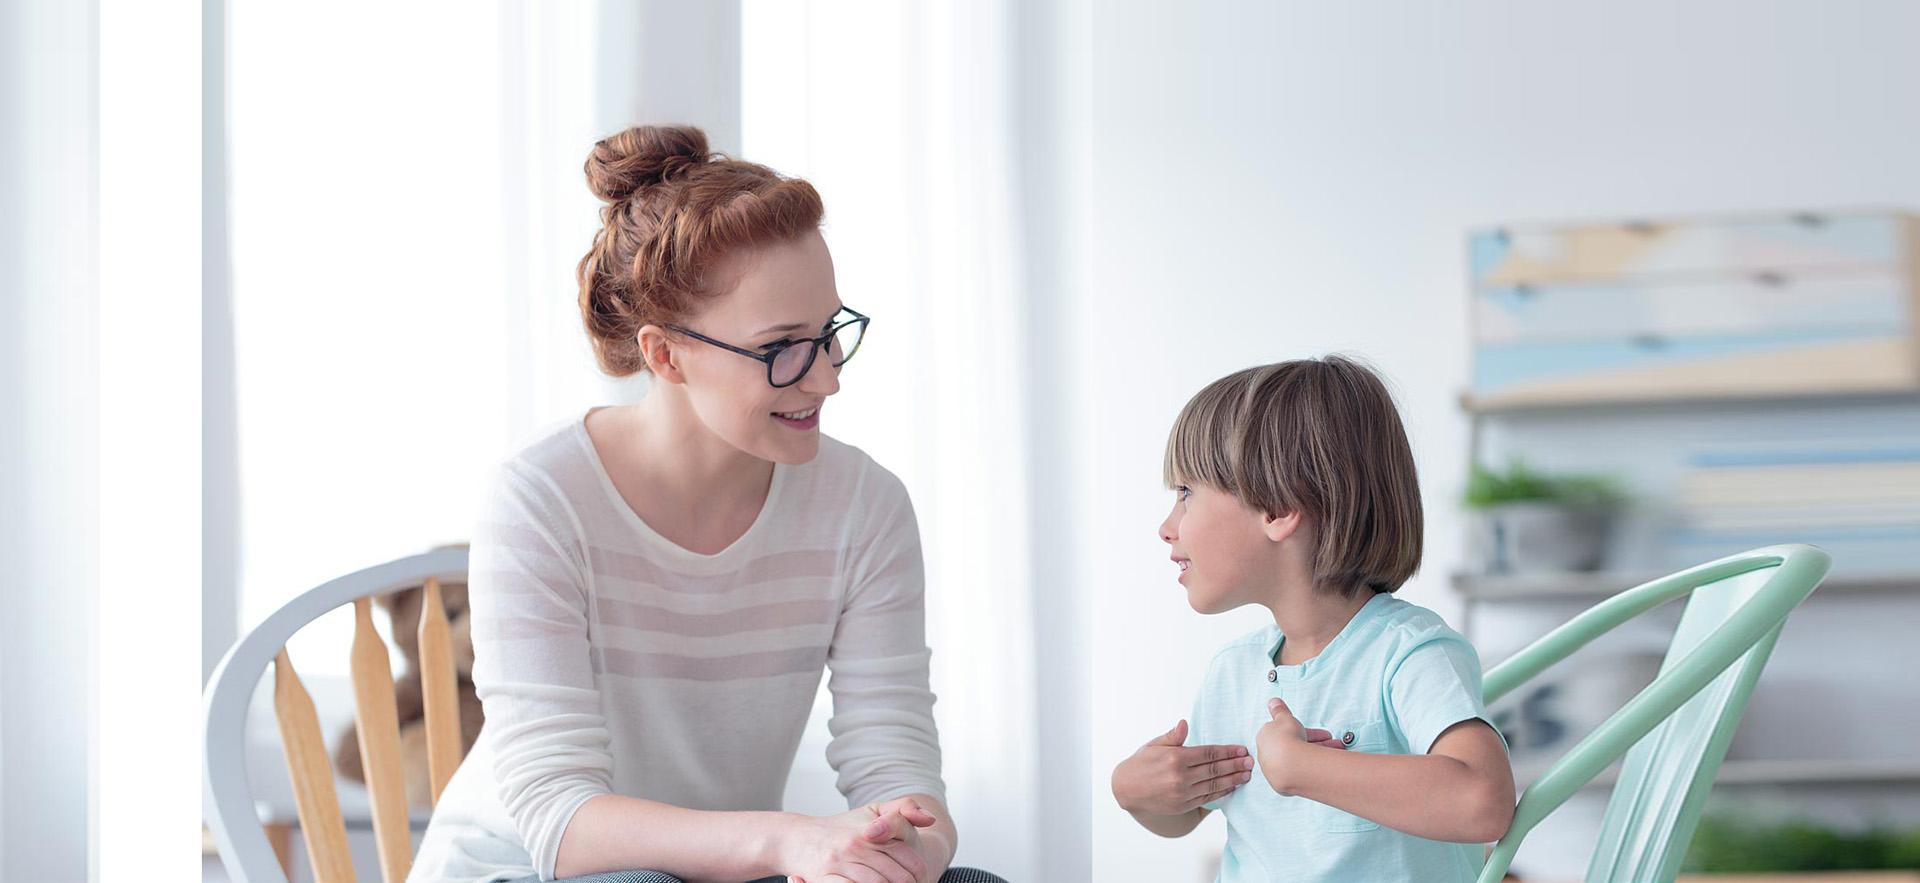 Female adult counselling a young boy.